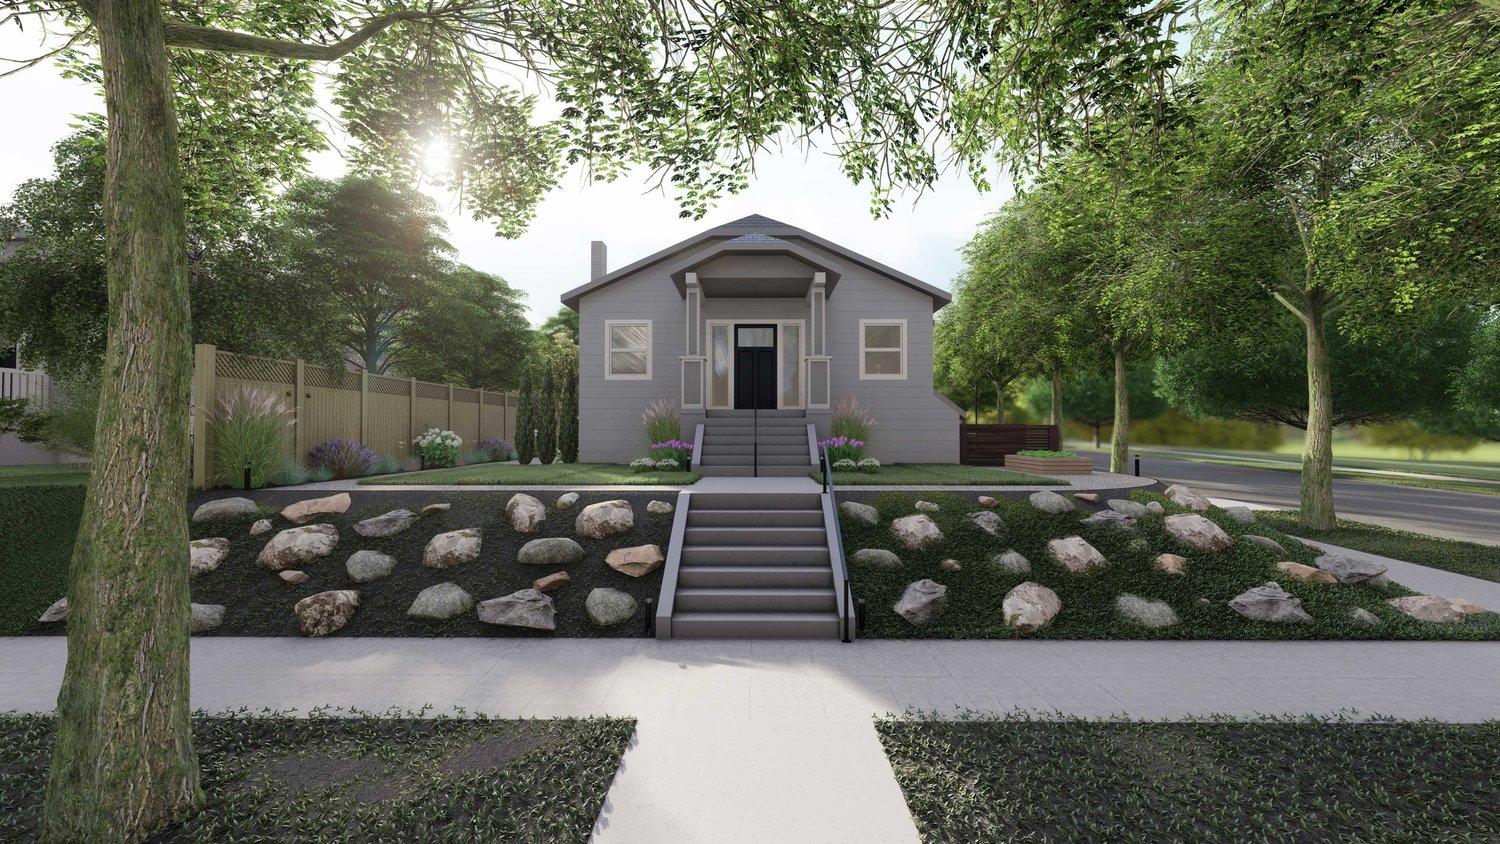 Bellevue front yard with stone work and concrete walkway with steps leading up to the house